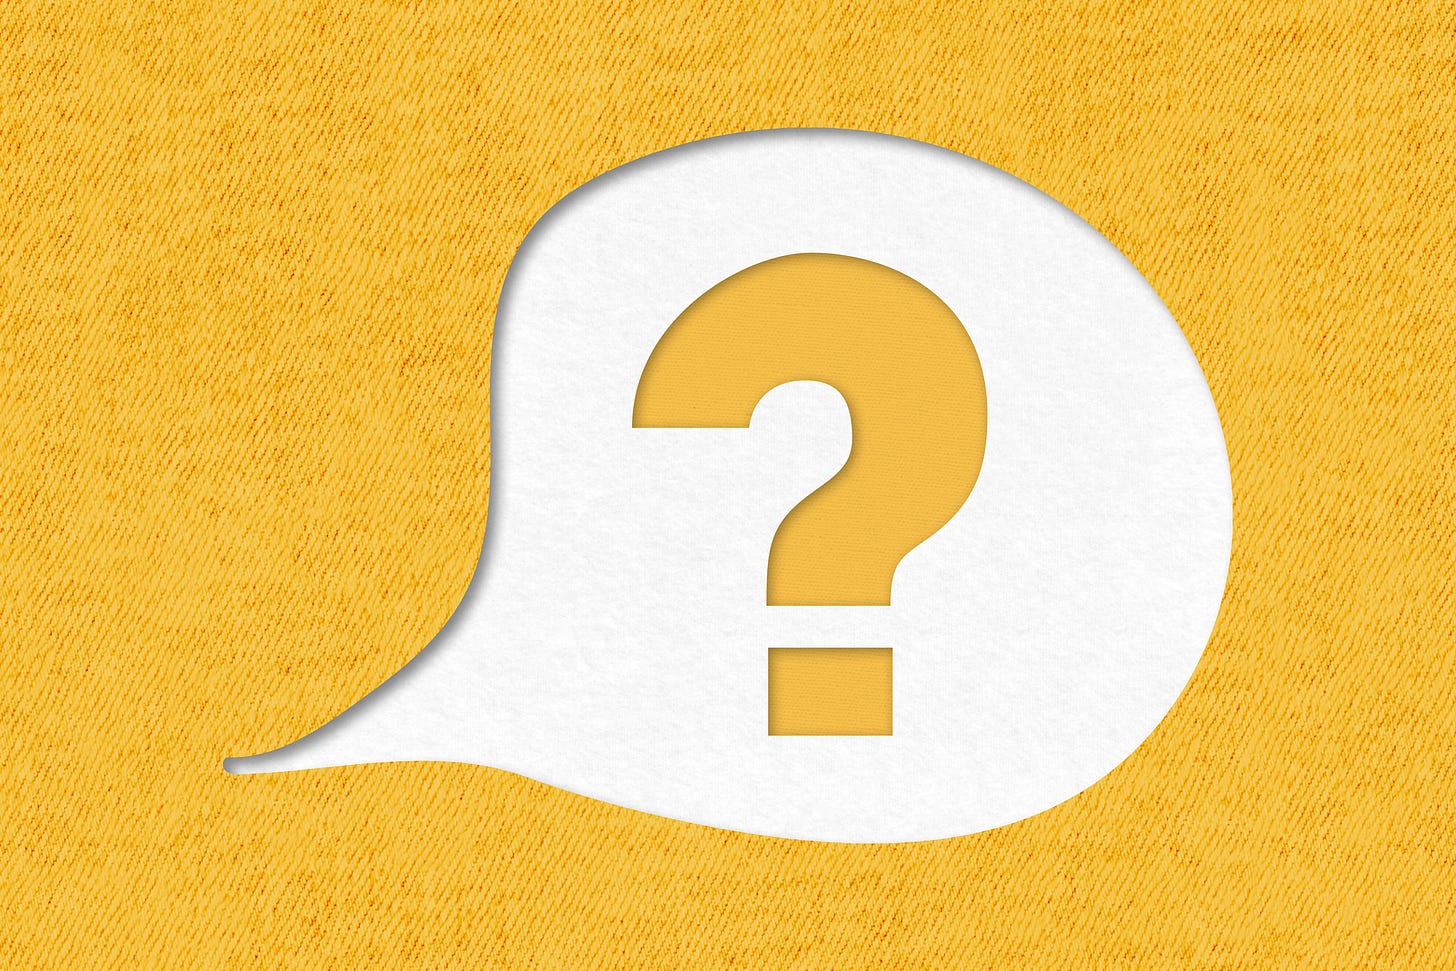 A question mark in a speech bubble on a yellow background.